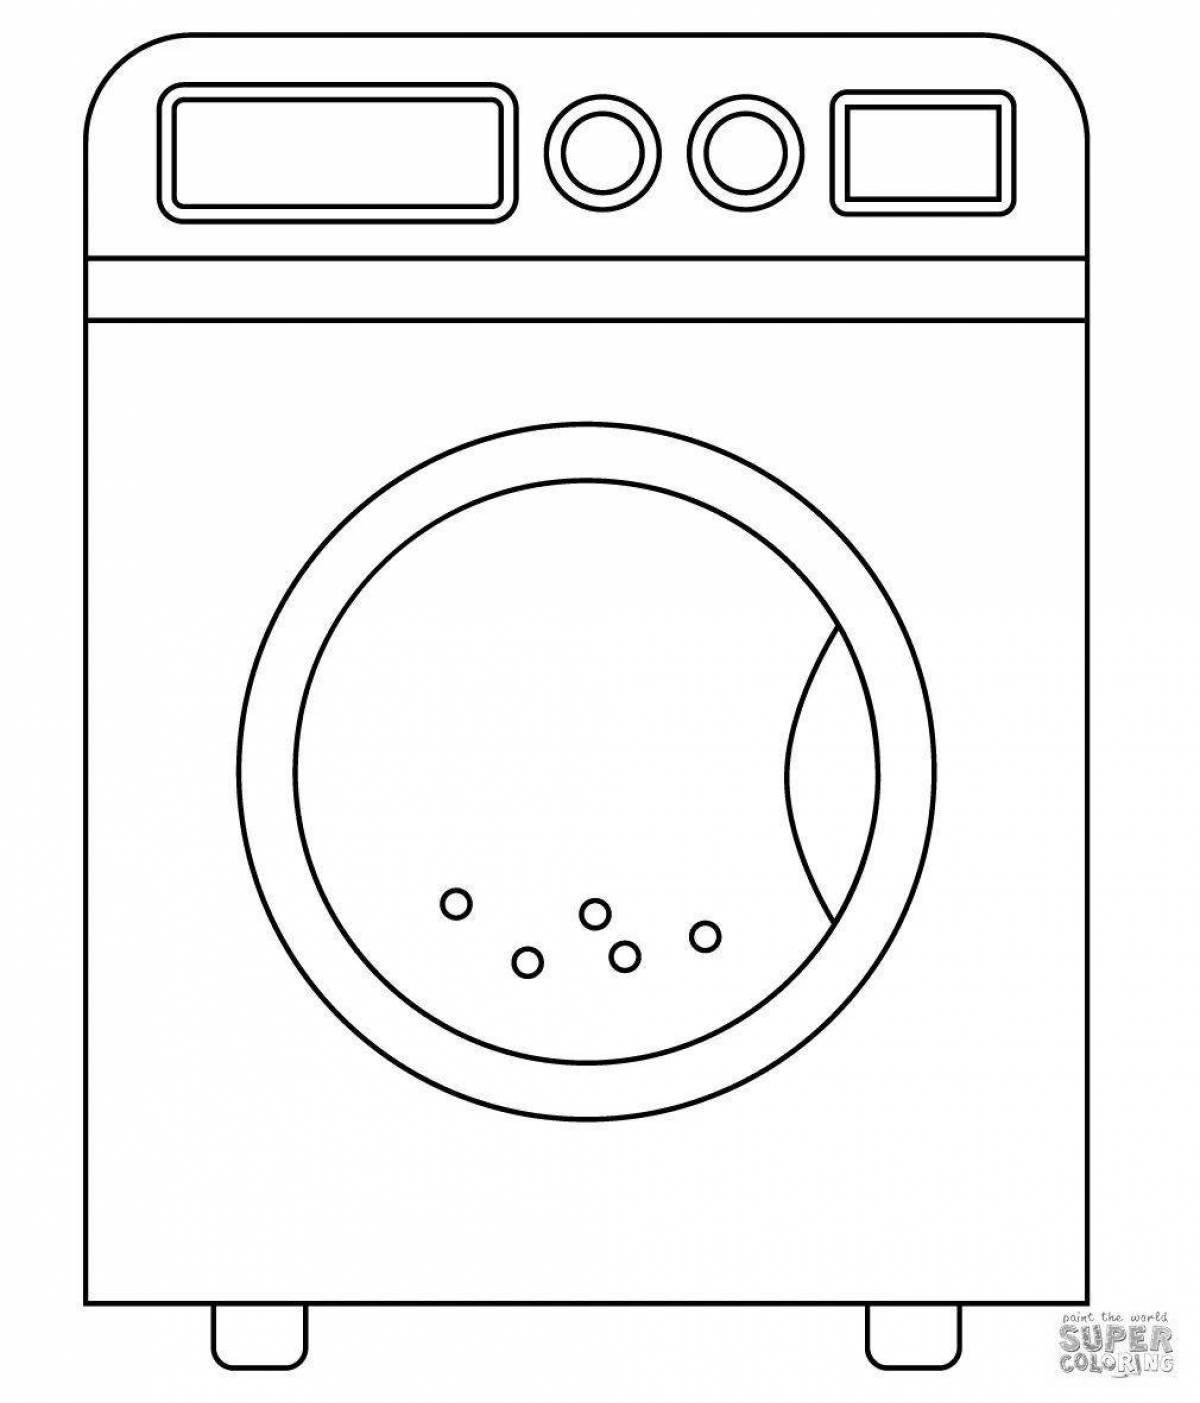 Lovely preschool washing machine coloring page